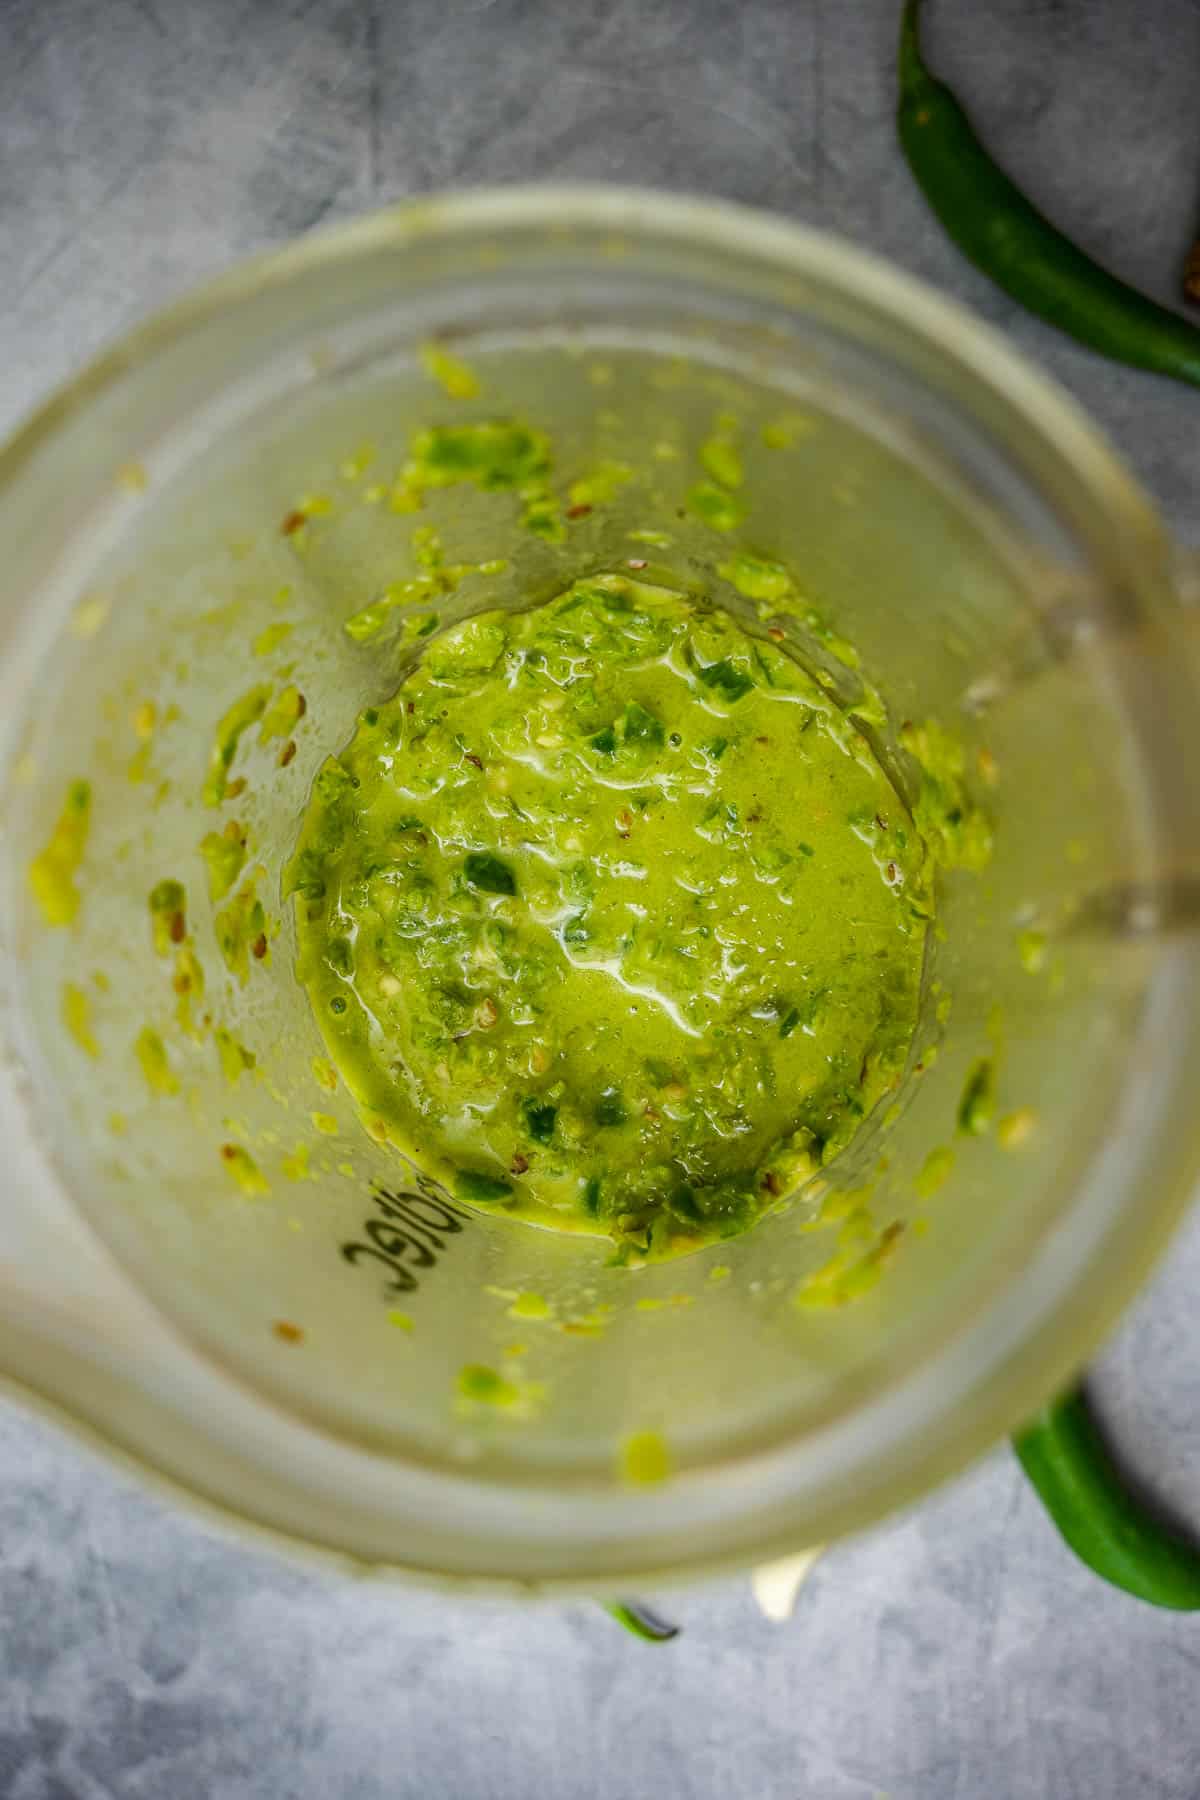 a blender filled with green shatta sauce. Garlic and peppers on the table.